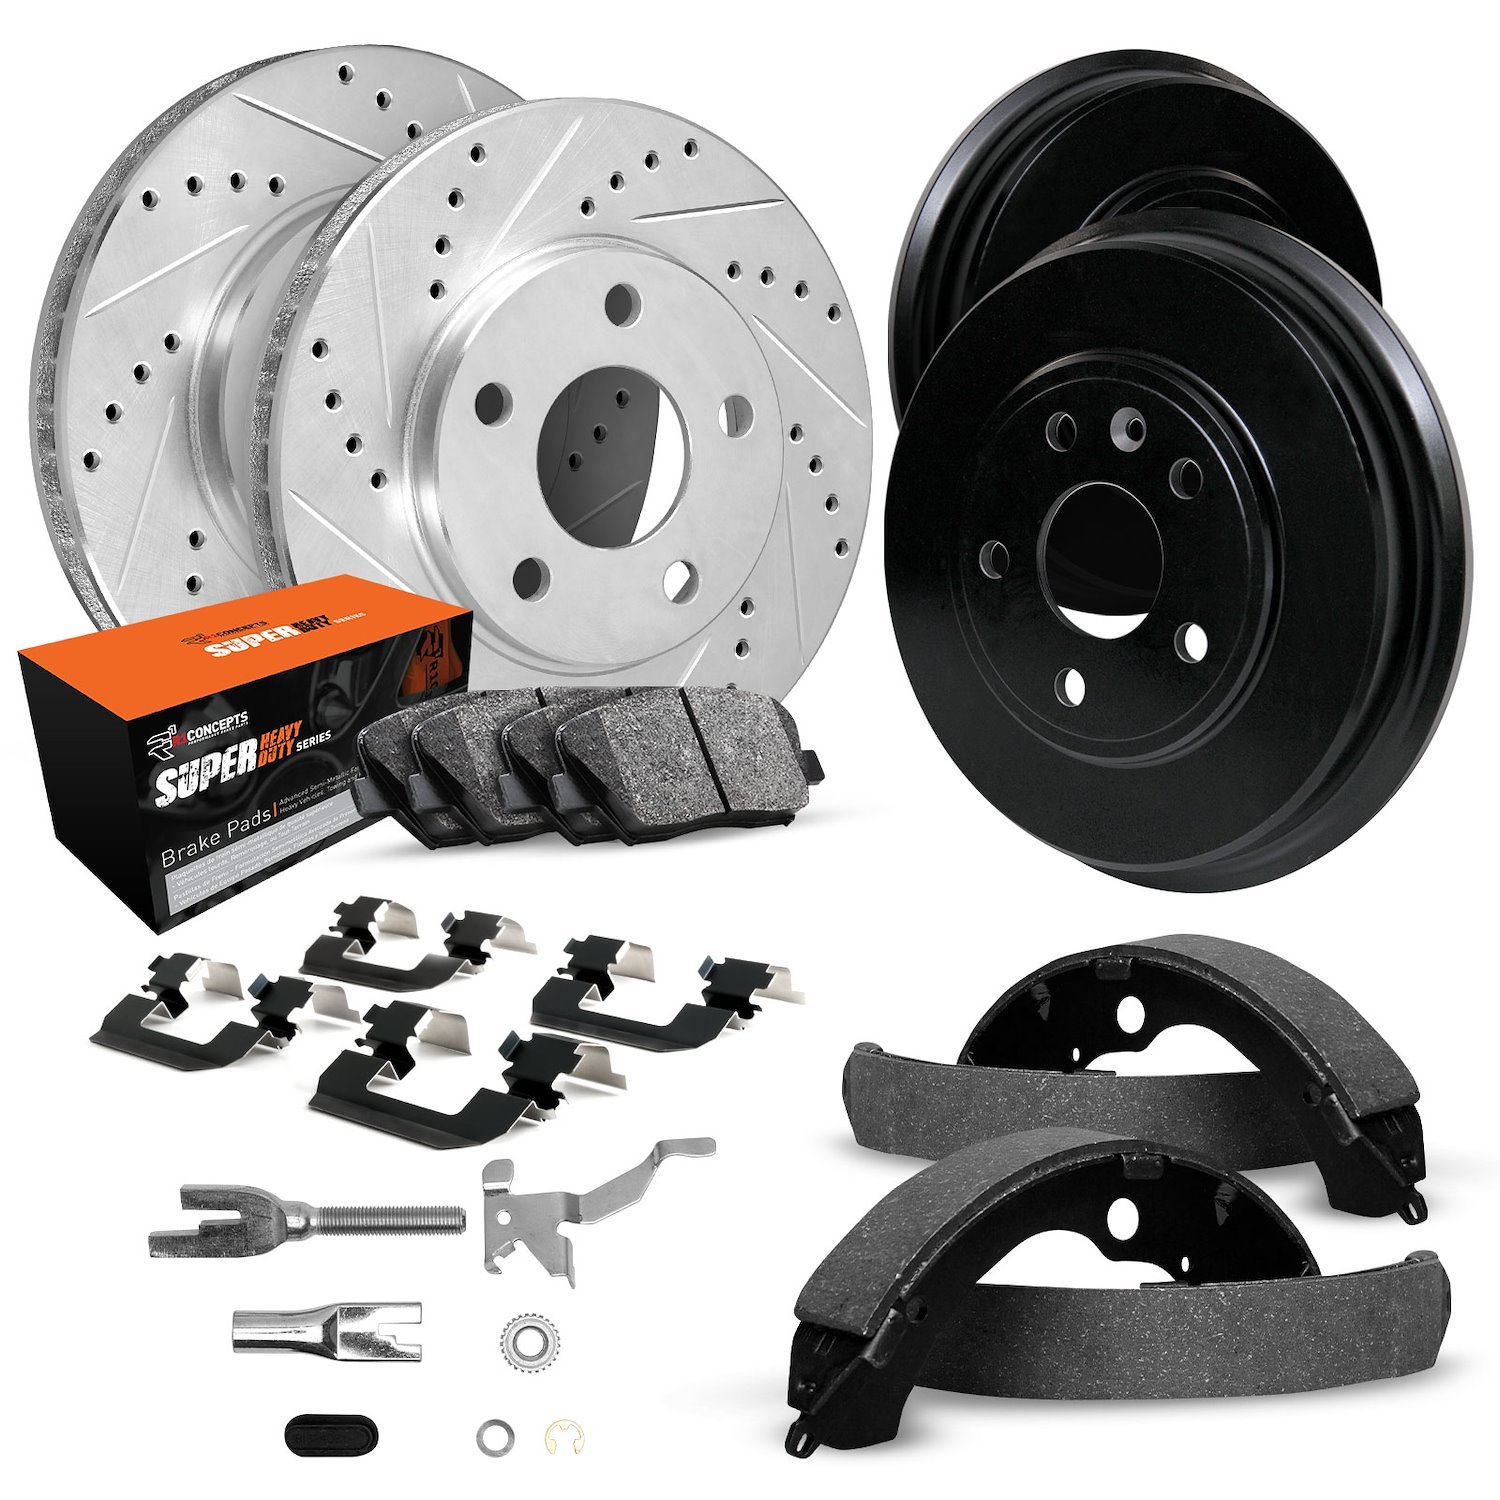 E-Line Drilled/Slotted Silver Rotor & Drum Set w/Super-Duty Pads, Shoes/Hardware/Adjusters, 1991-1996 Mopar